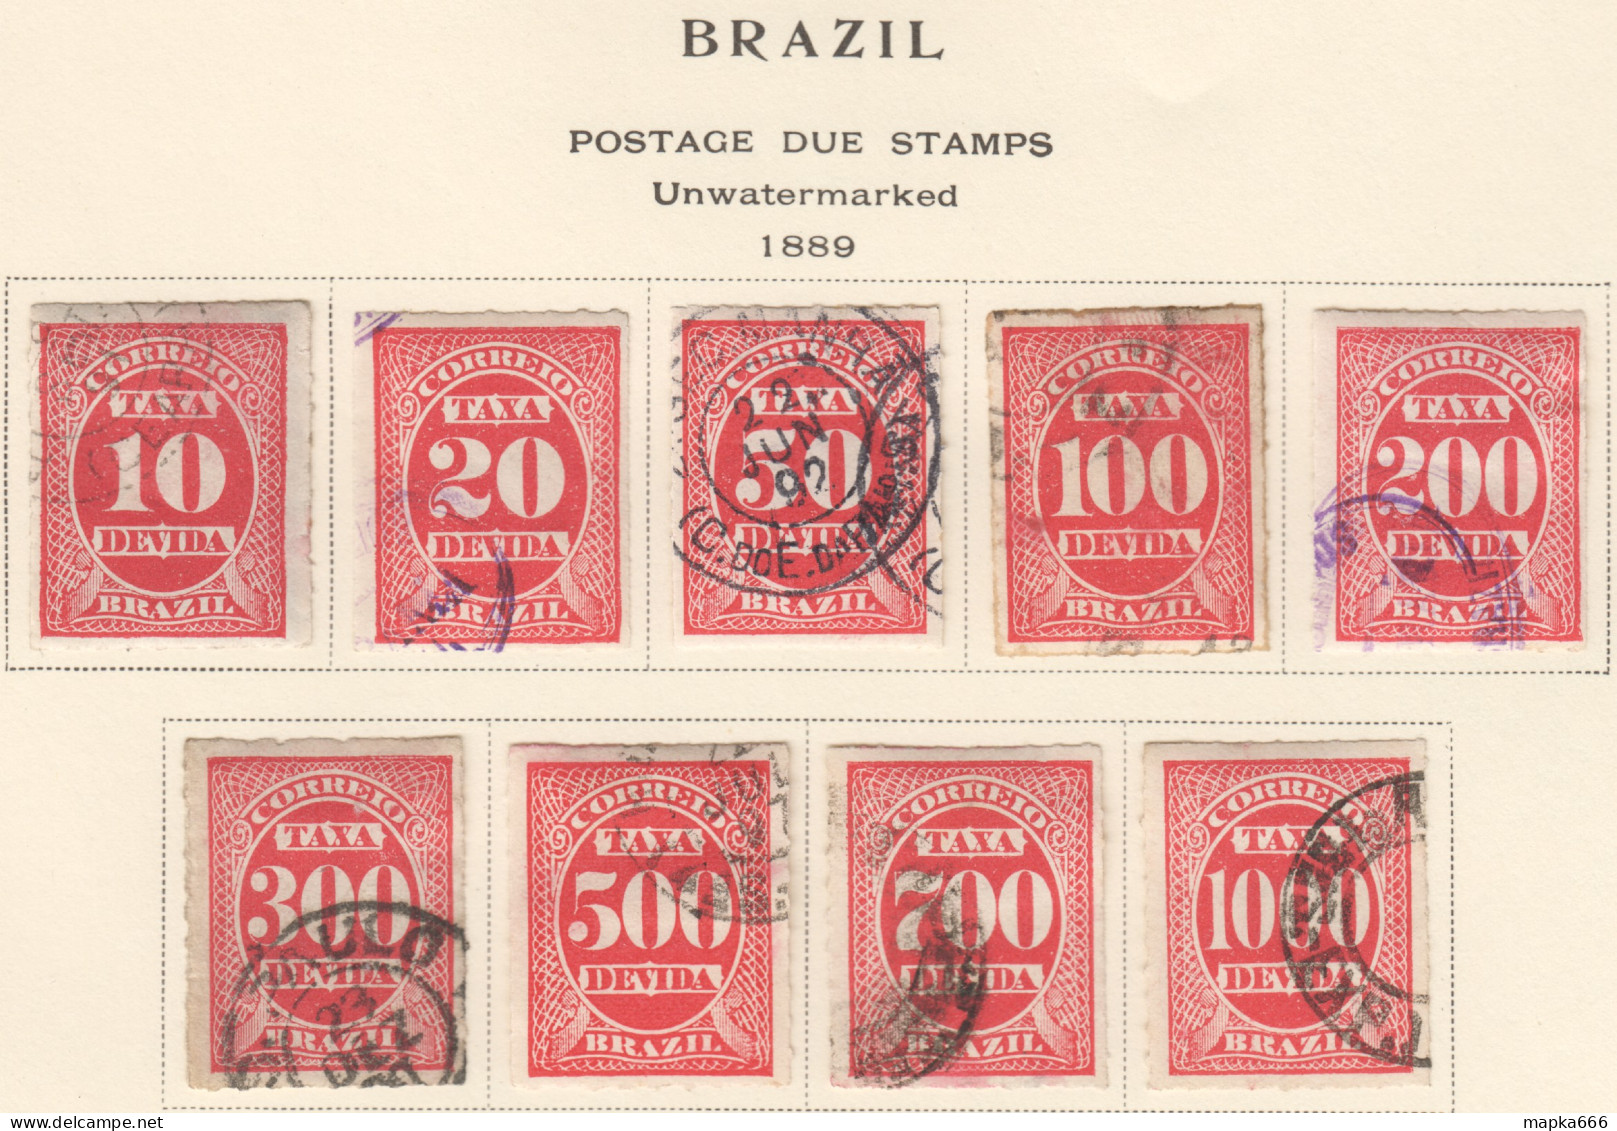 Bra184 1889 Brazil Postage Due Stamps Michel #1-9 85 Euro 1Set Used - Postage Due